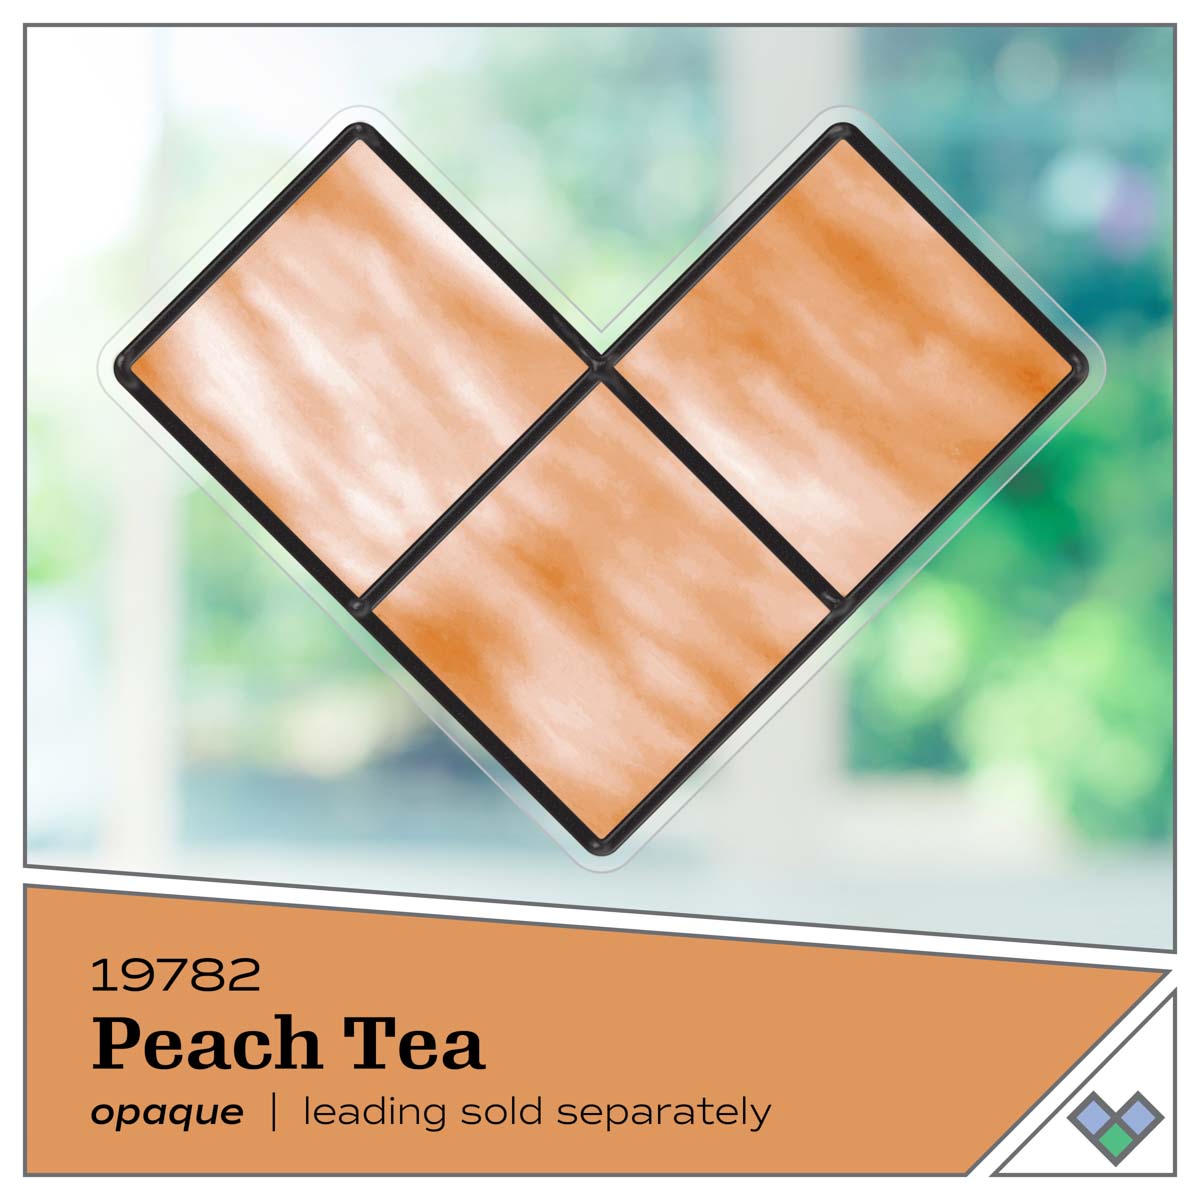 Shop Plaid Gallery Glass ® Stained Glass Effect Paint - Peach Tea, 2 oz. -  19782 - 19782